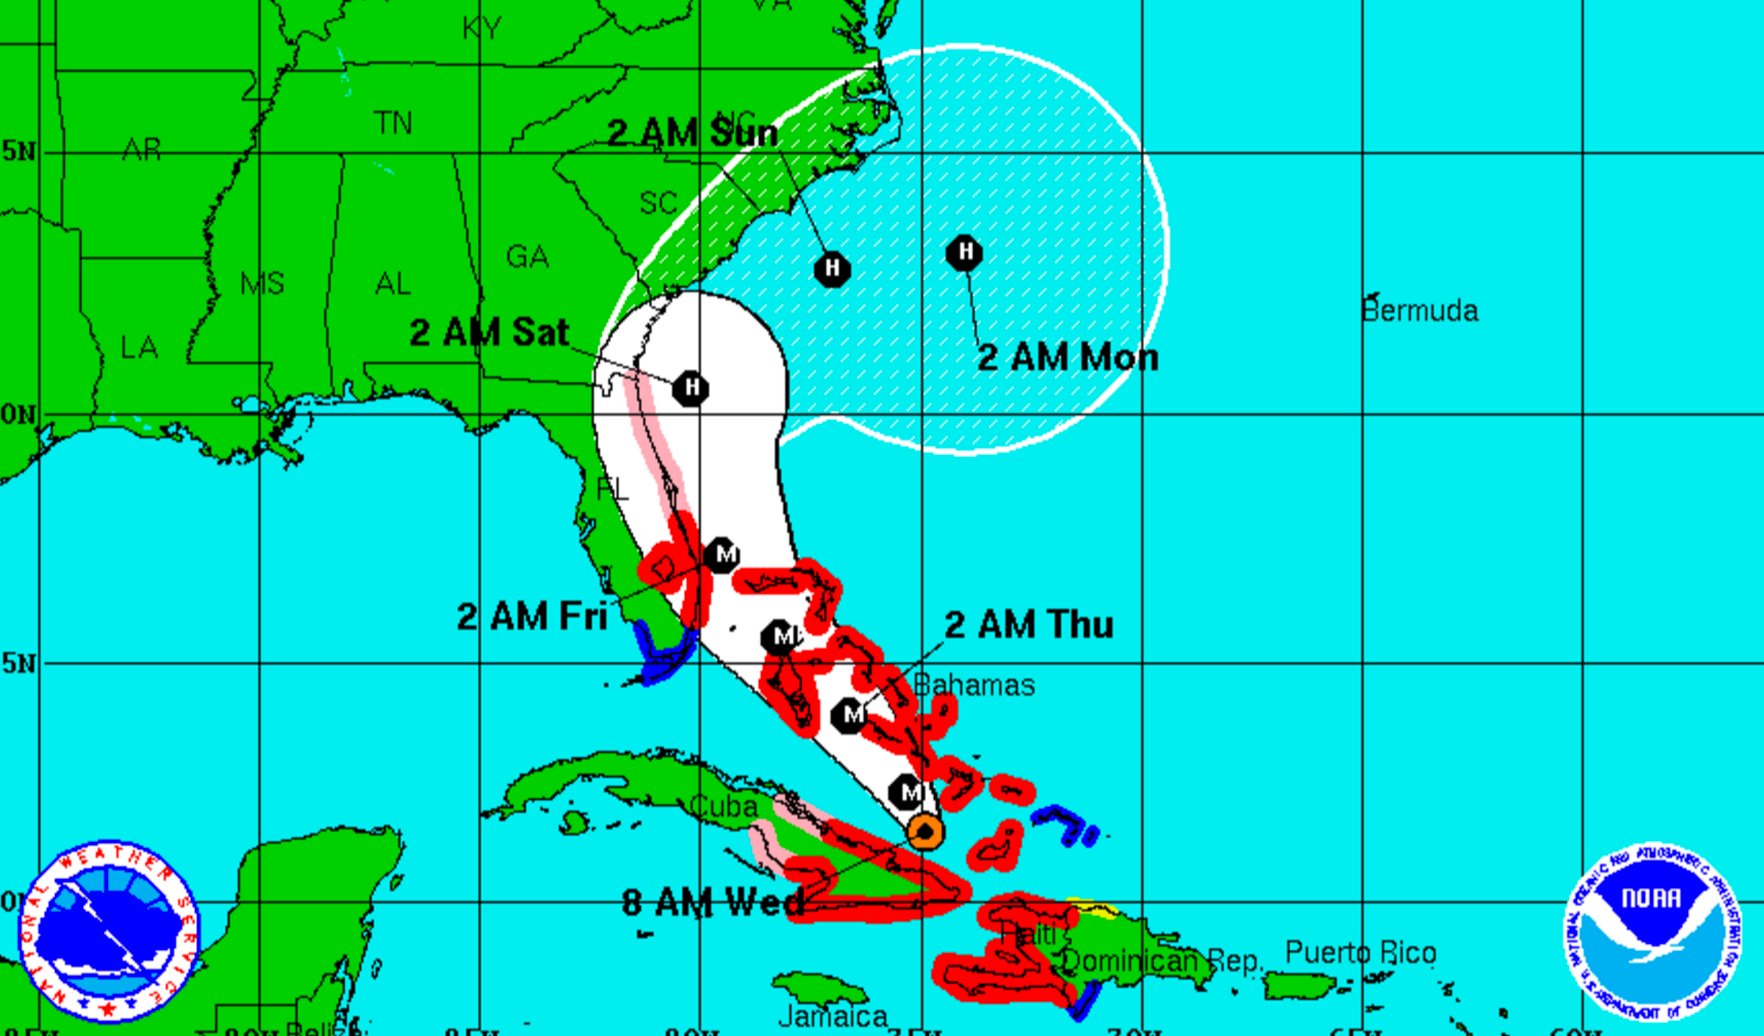 The 8 a.m. Matthew forecast track from the National Hurricane Center.